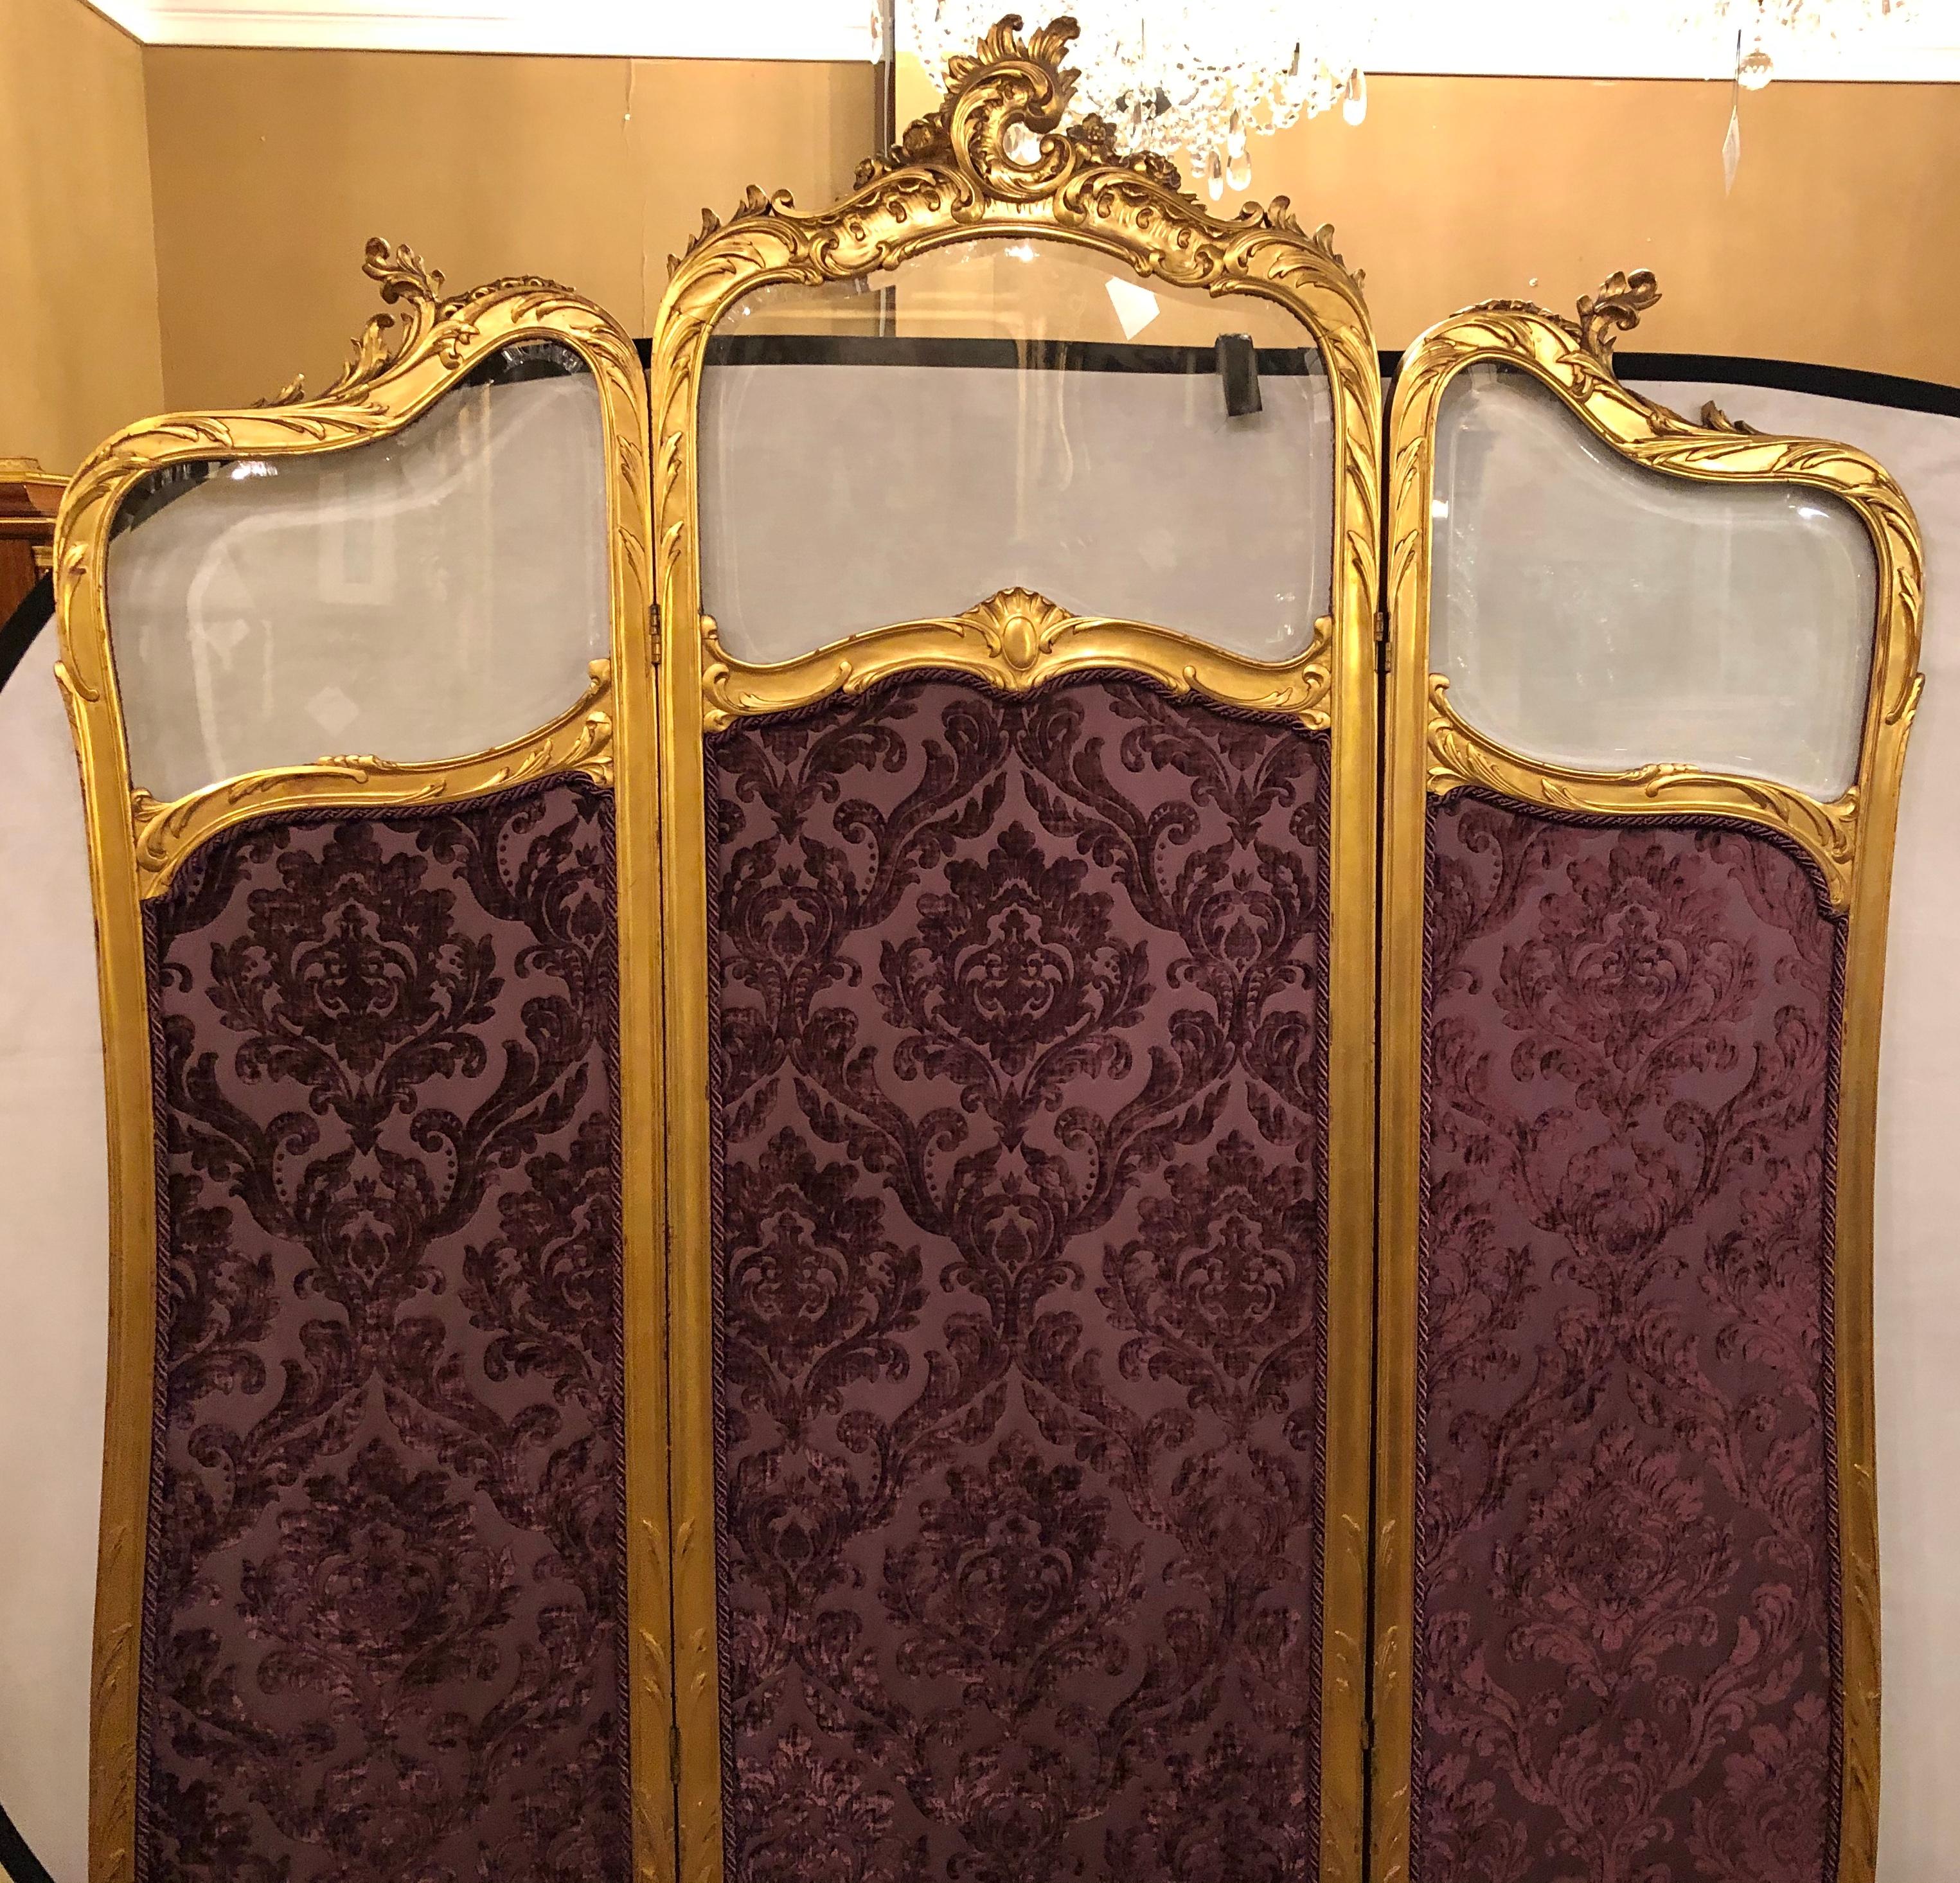 Fine Louis XV style giltwood three fold screen with original glass panels newly upholstered in a cut velvet amethyst color fabric, French, 19th century.


SXX